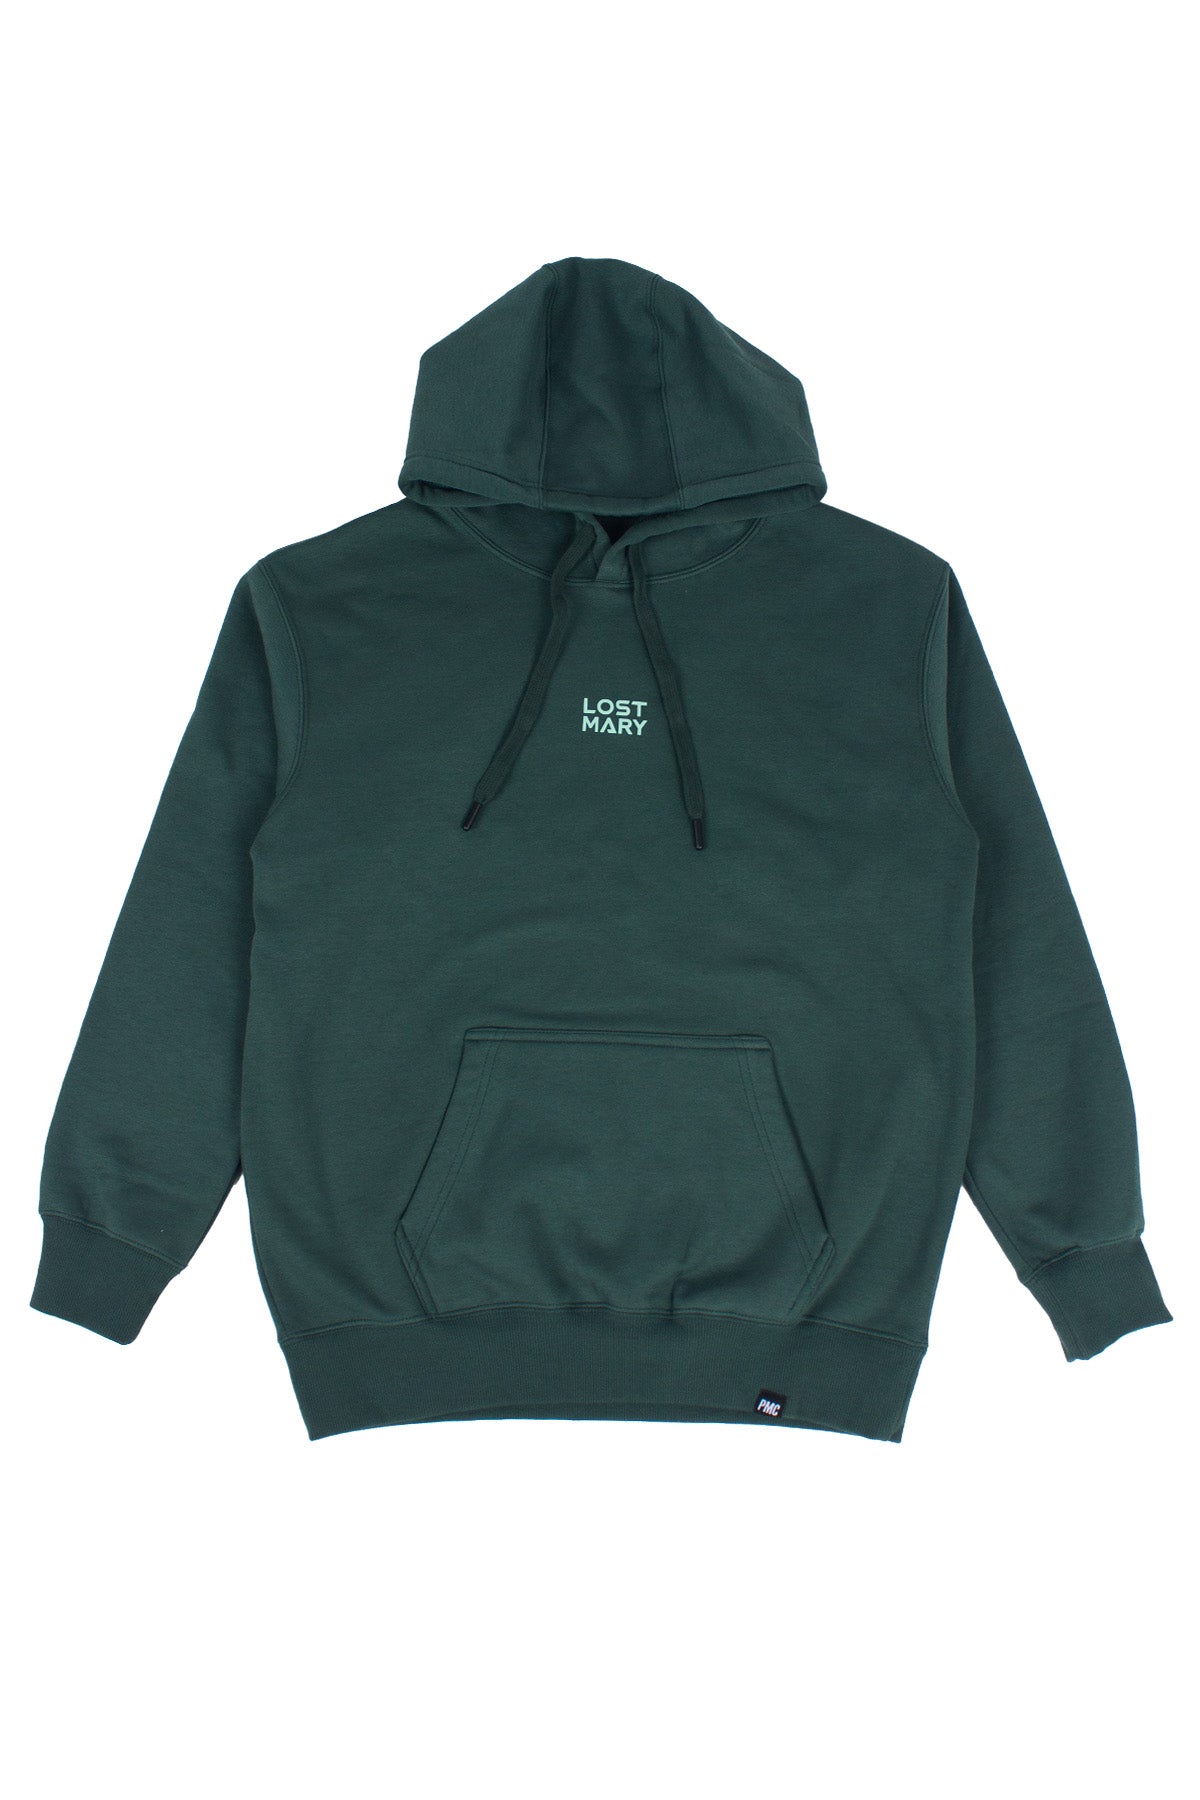 LOST MARY Green Apple Hoodie Forest Green